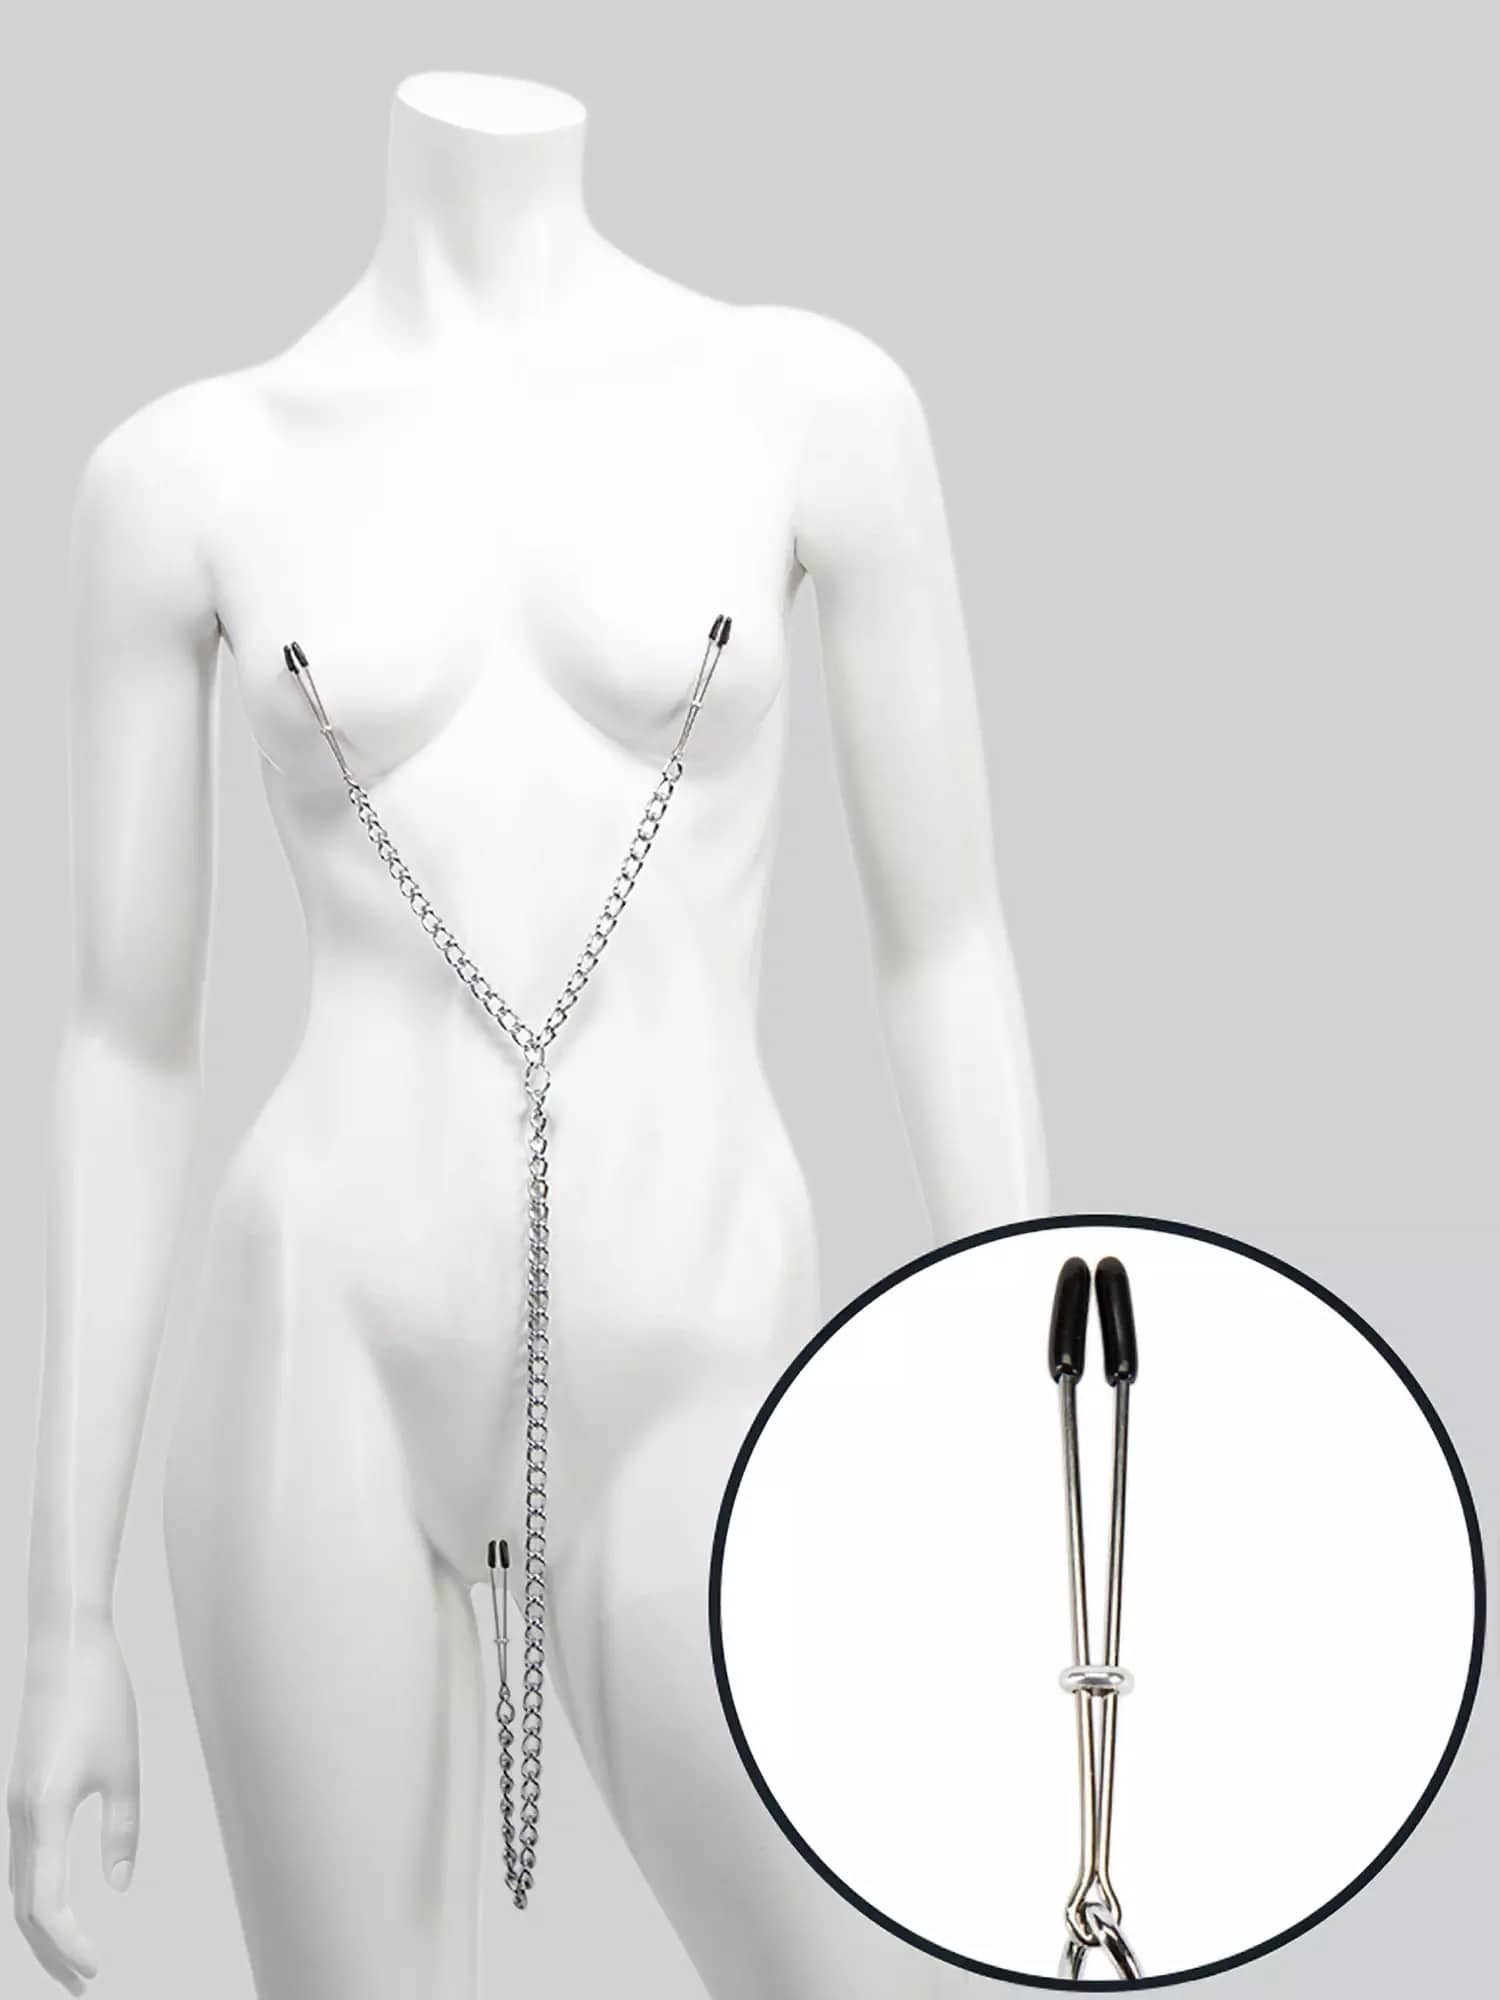 DOMINIX Deluxe Nipple Tweezers and Clit Clamp with Chain. Slide 3